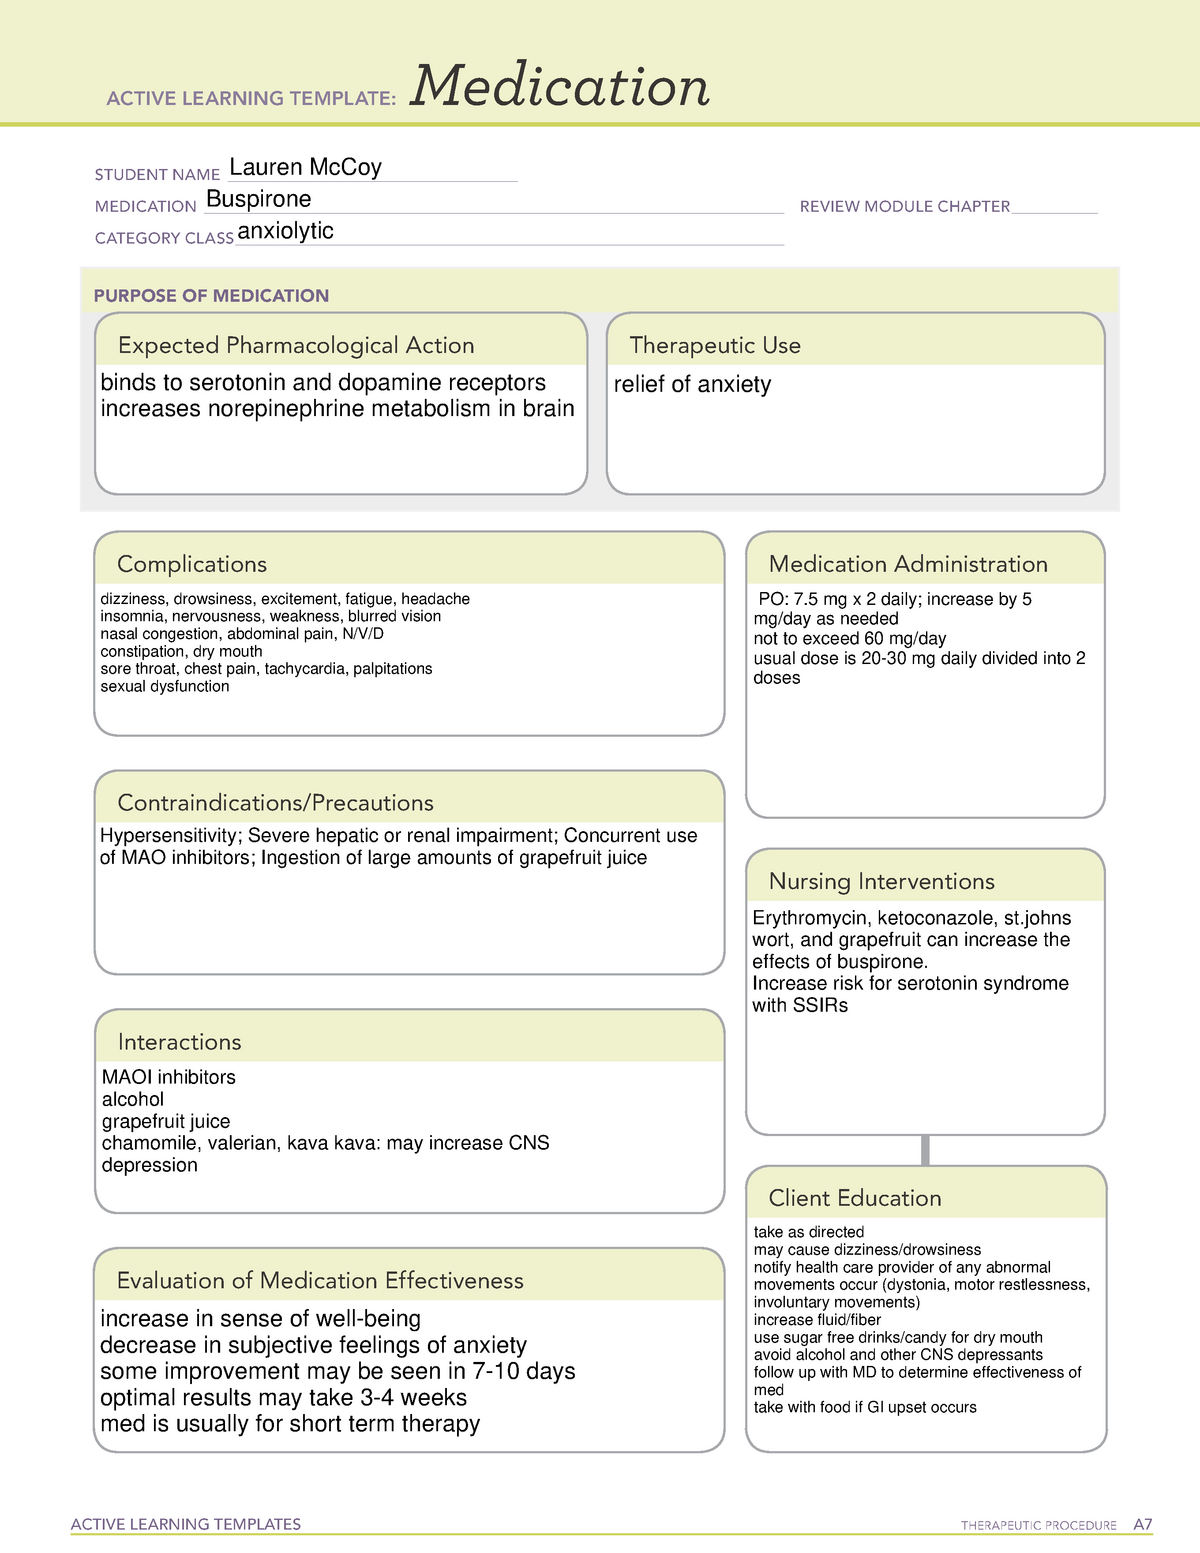 Buspirone medication ati - ACTIVE LEARNING TEMPLATES THERAPEUTIC ...